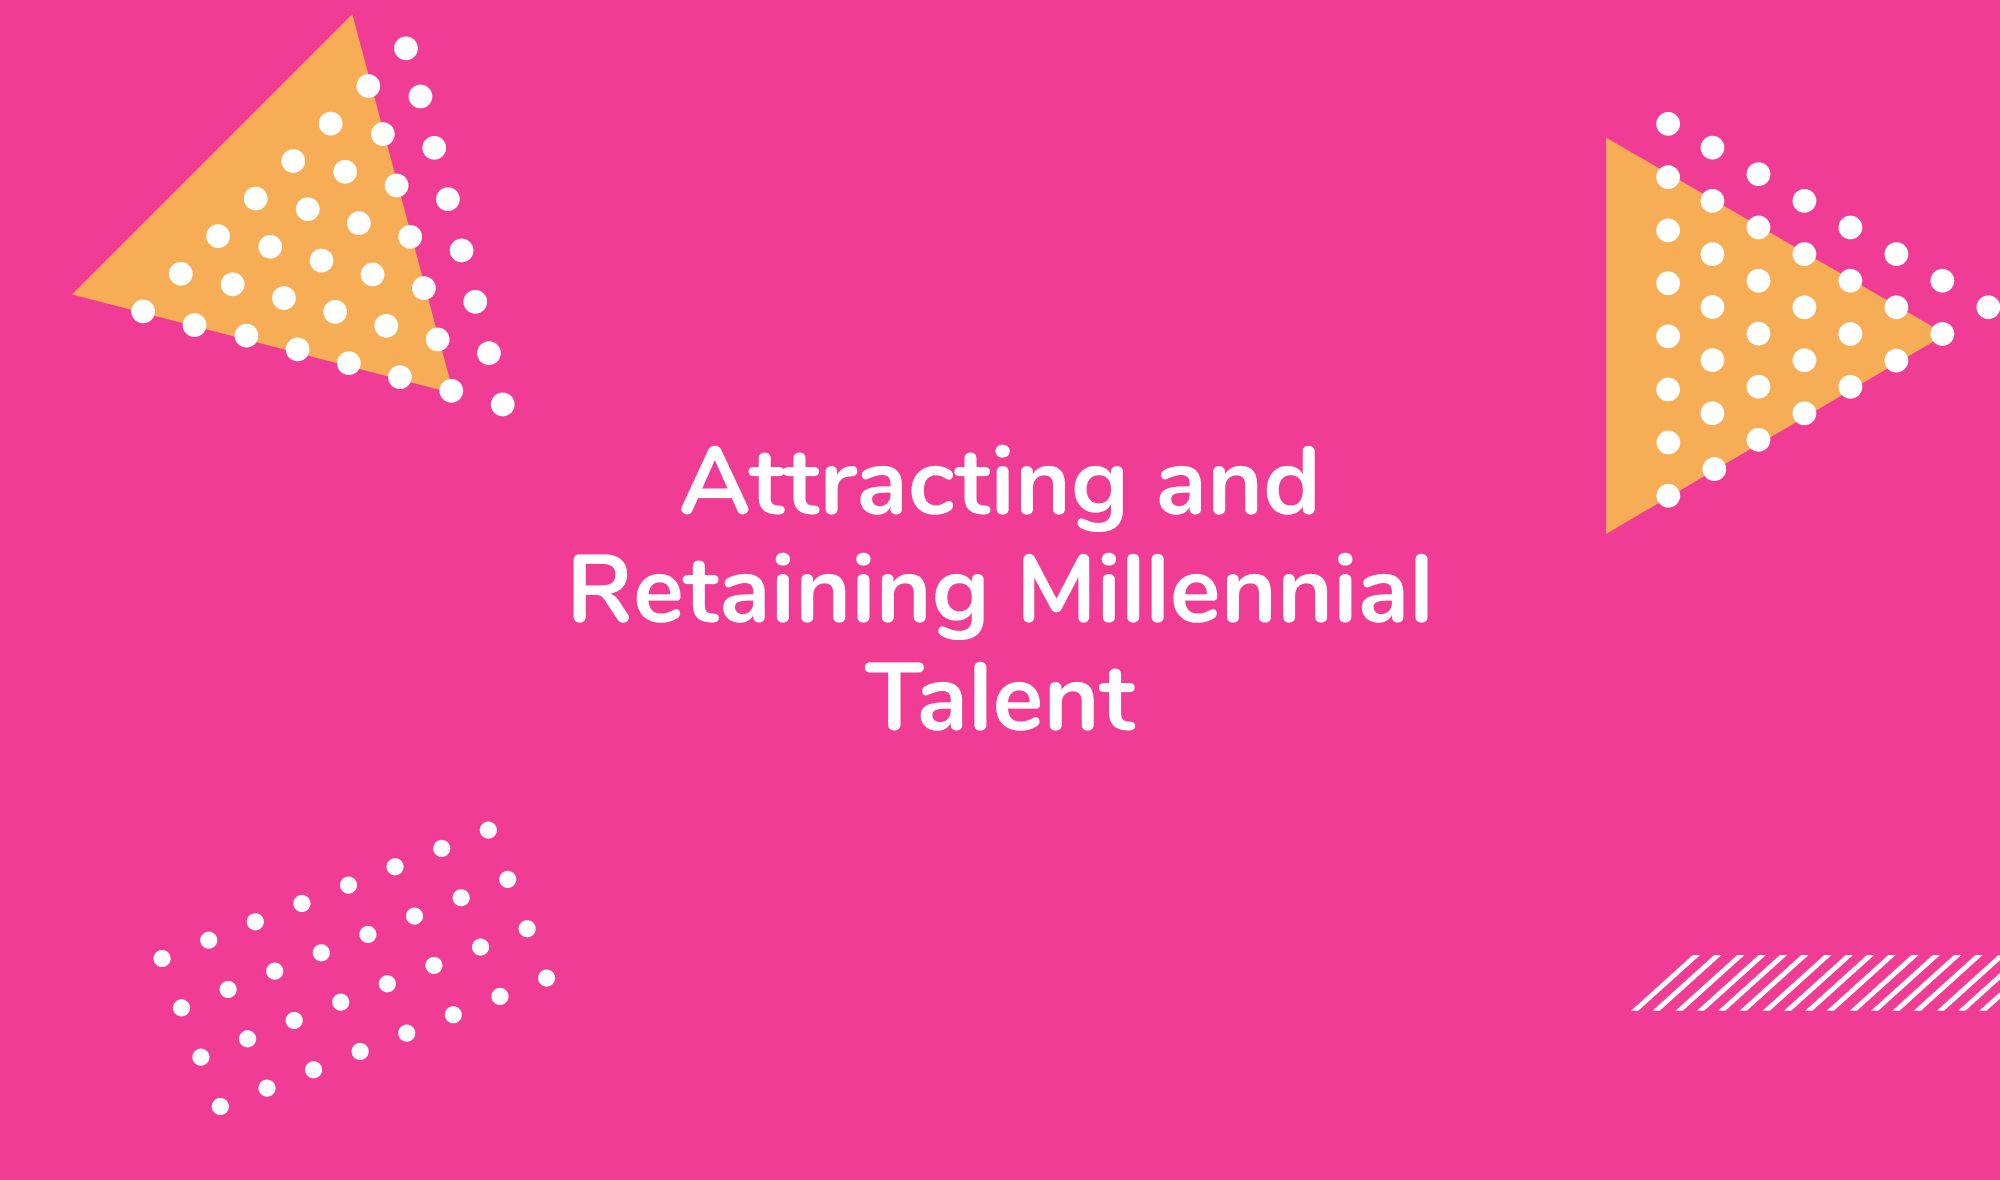 Attracting and Retaining Millennial Talent